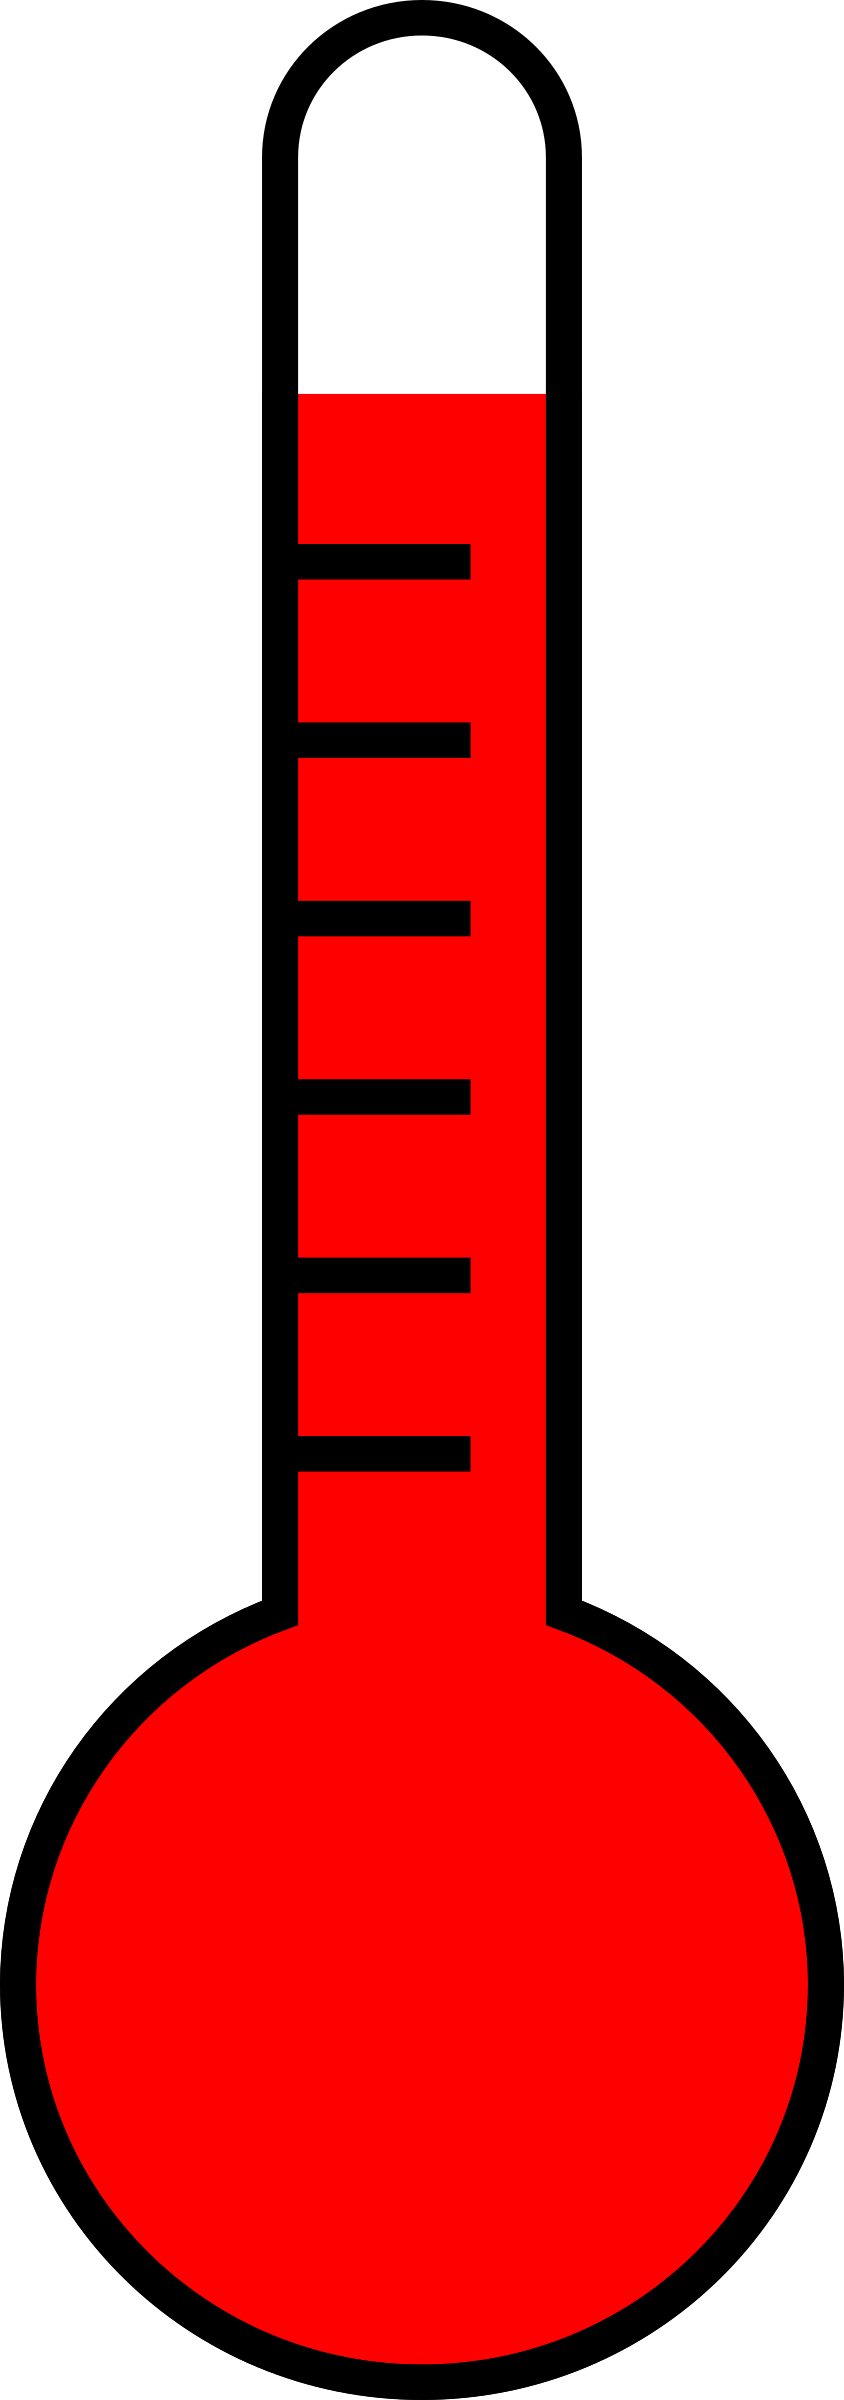 A Red And Black Measuring Device